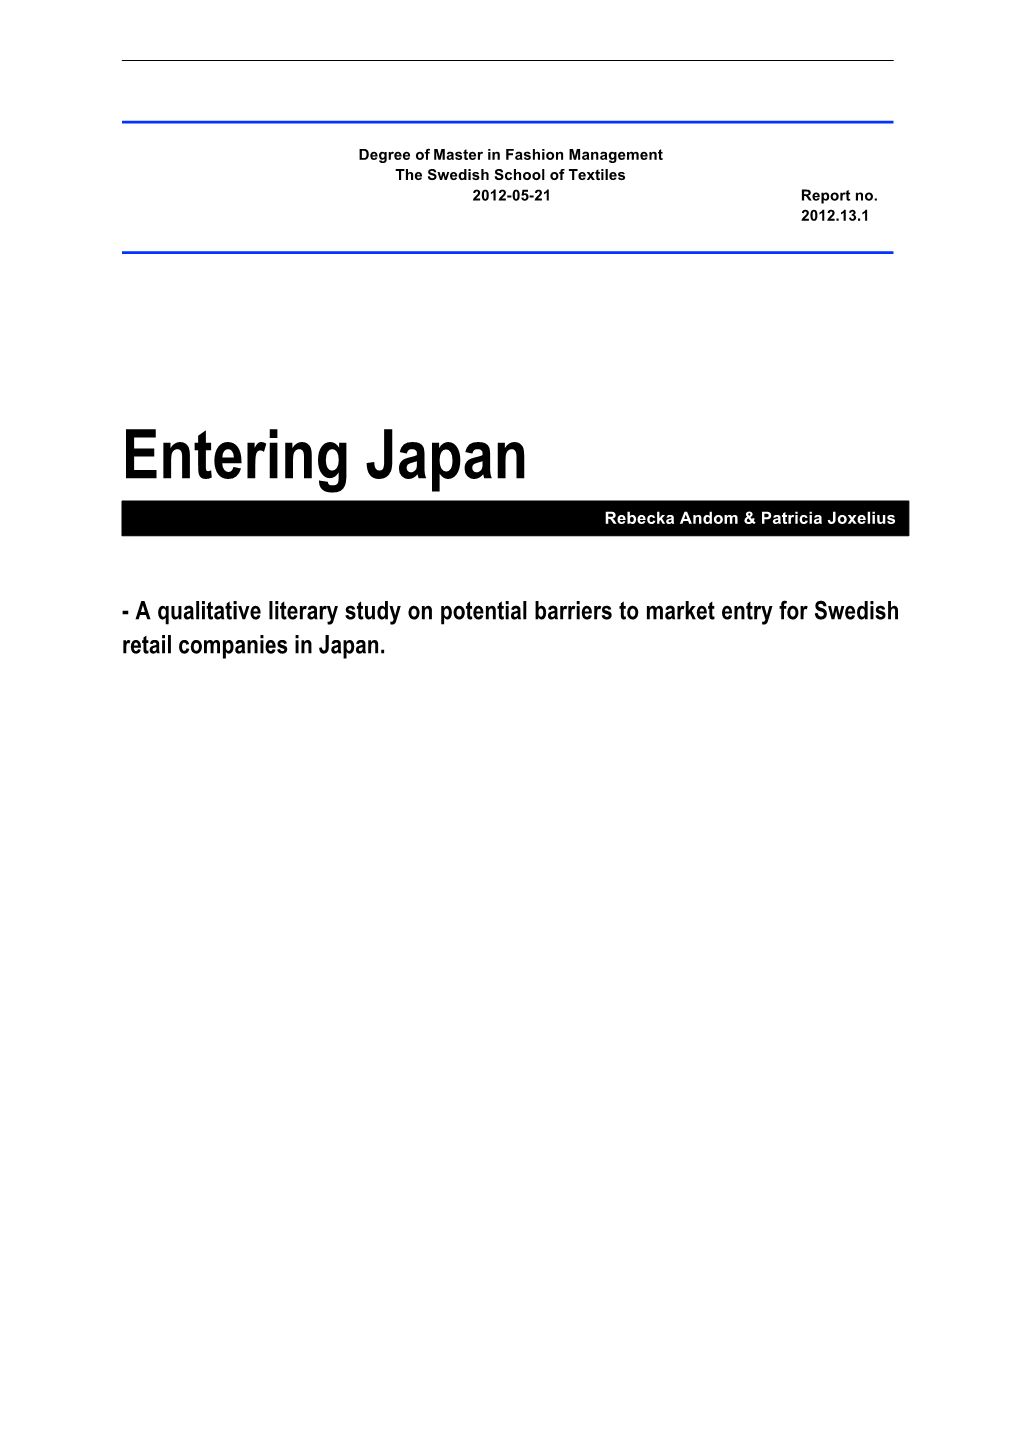 Entering Japan Rebecka Andom & Patricia Joxelius - a Qualitative Literary Study on Potential Barriers to Market Entry for Swedish Retail Companies in Japan